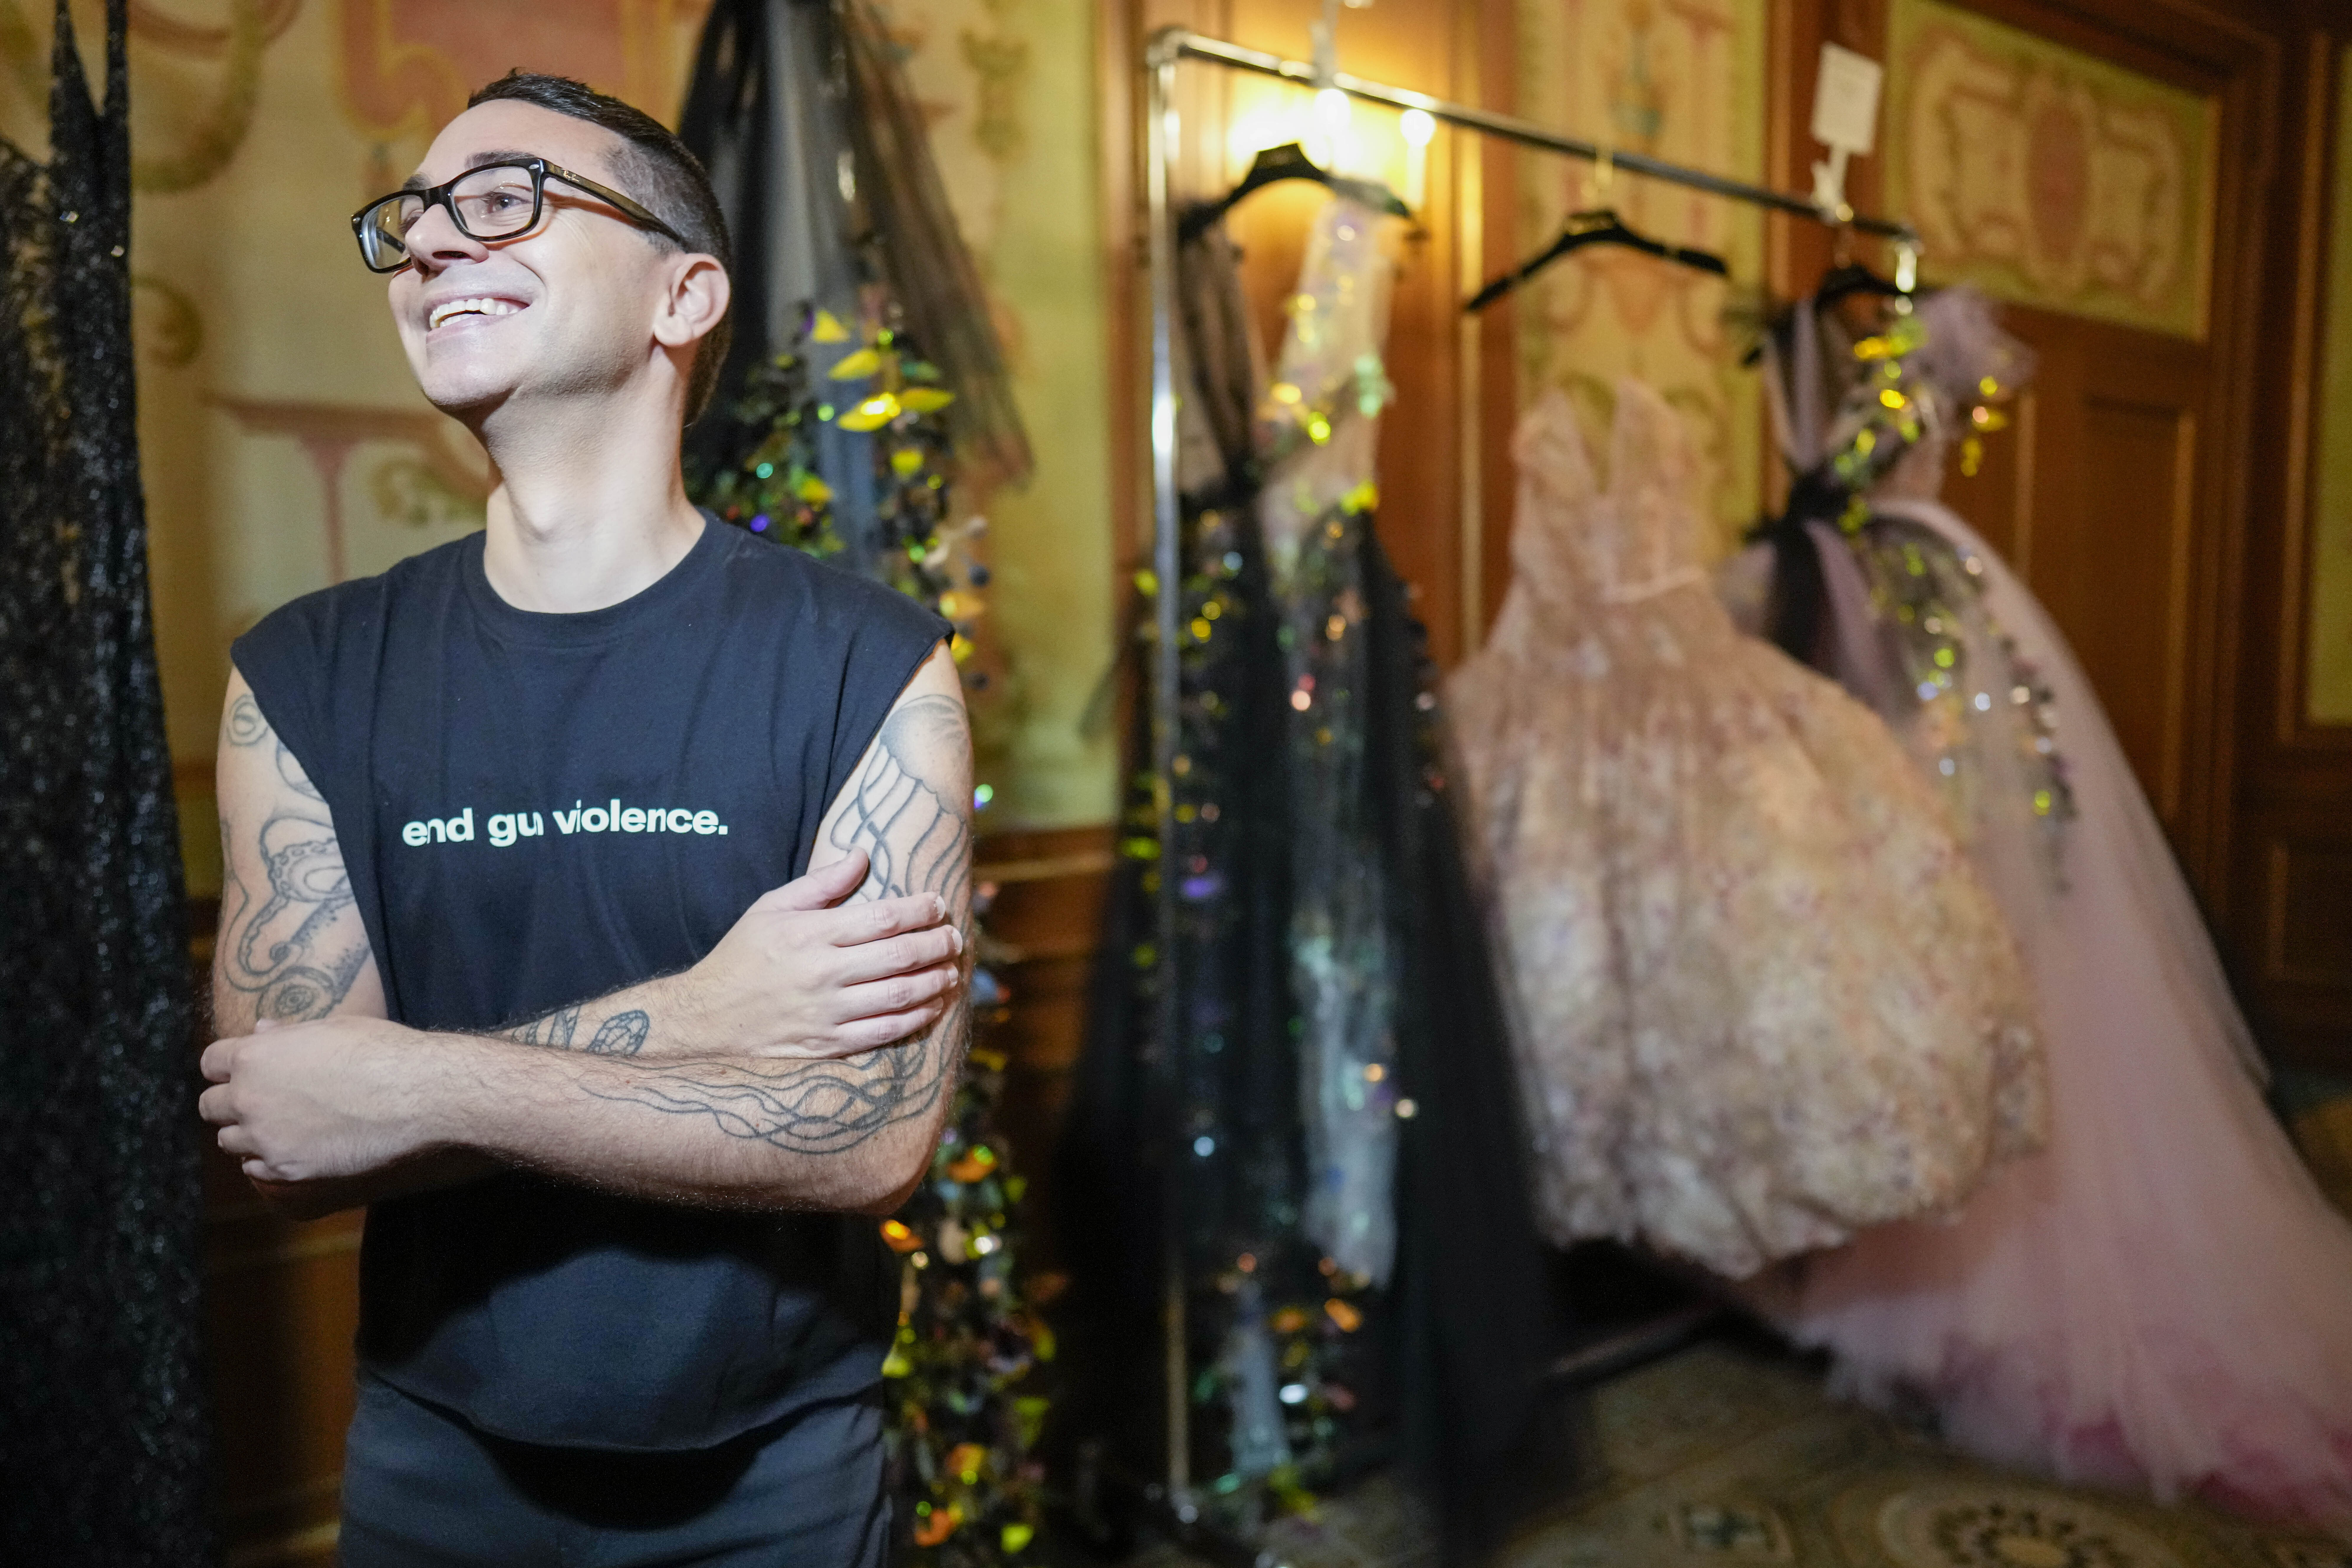 LOOK: Christian Siriano celebrates 15 years in fashion business